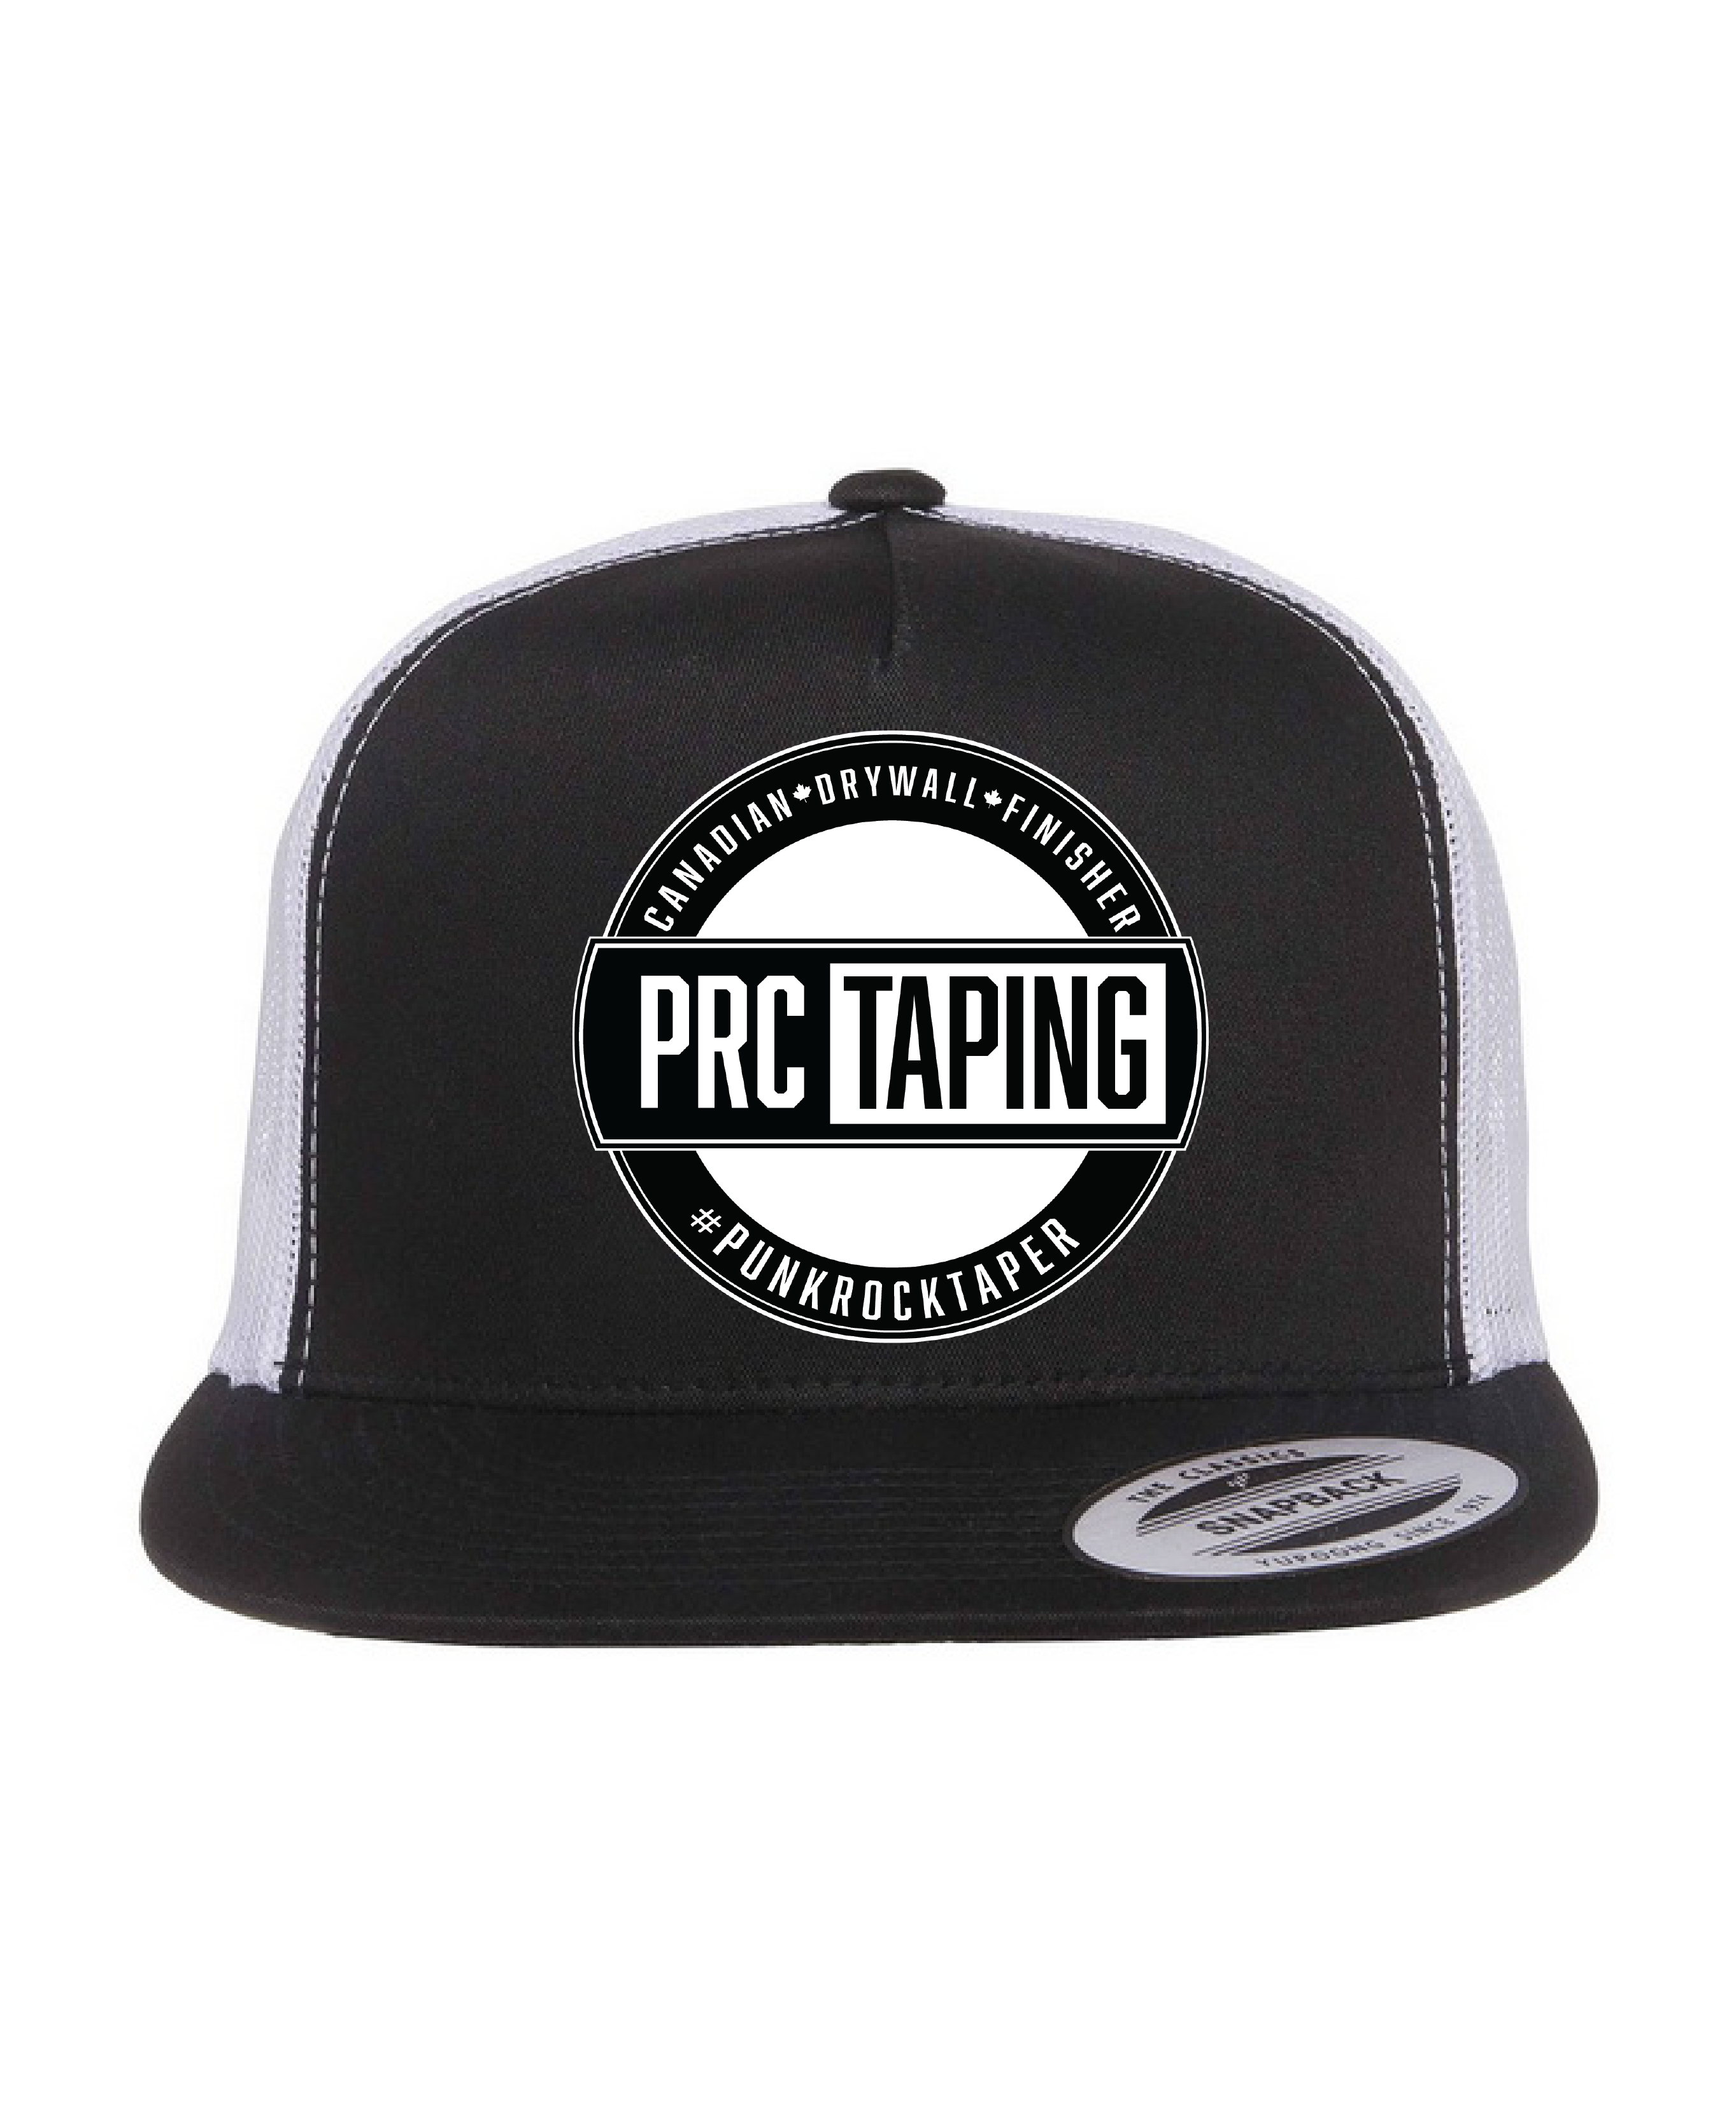 PRC Taping Limited Edition "Big Patch" Snap Back